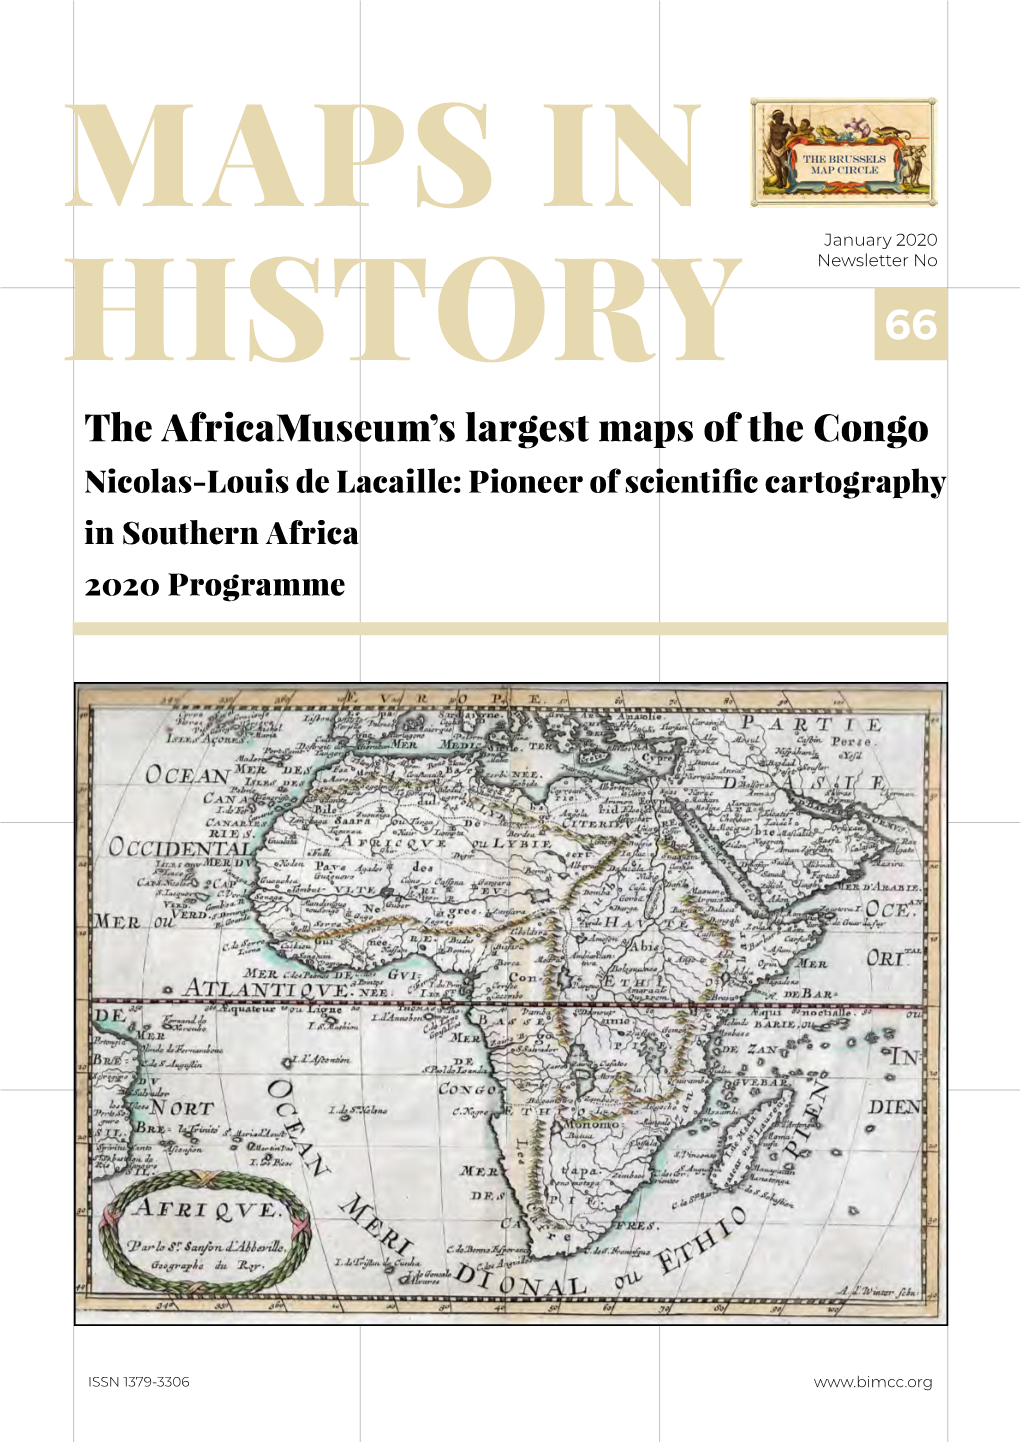 The Africamuseum's Largest Maps of the Congo